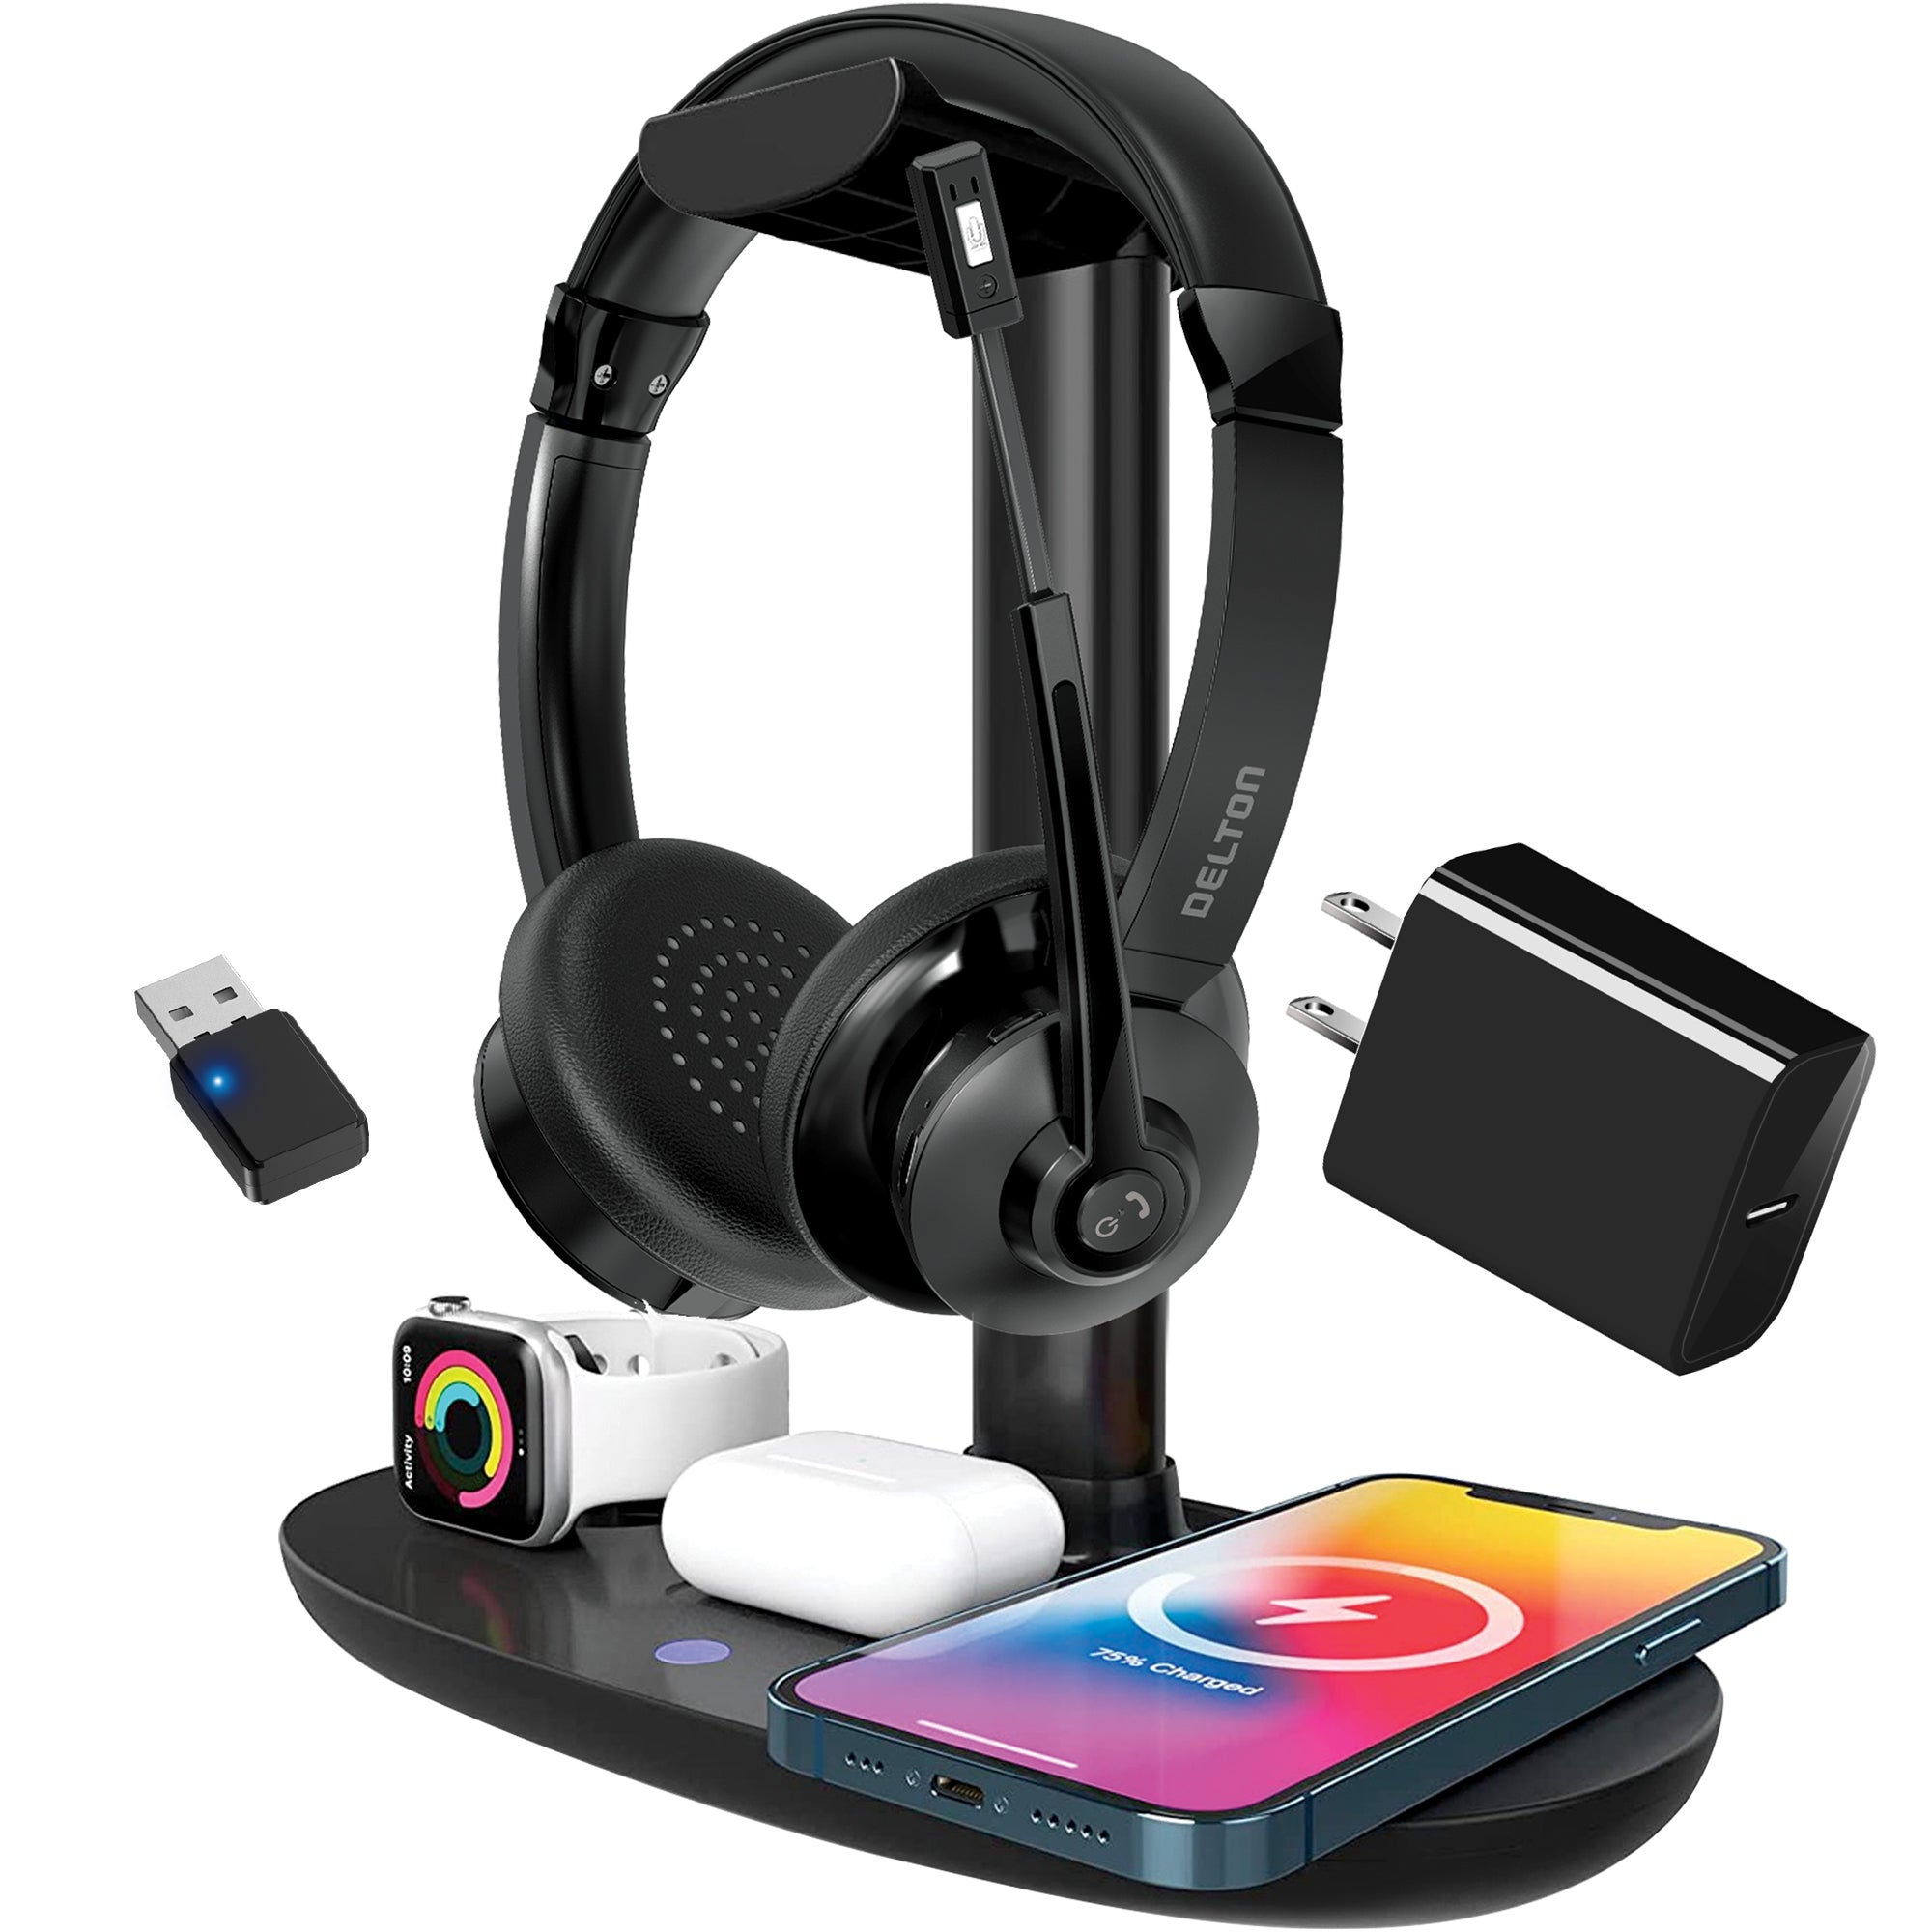 Delton 30X Wireless Noise Canceling Bluetooth Stereo Headset with HS1 Stand